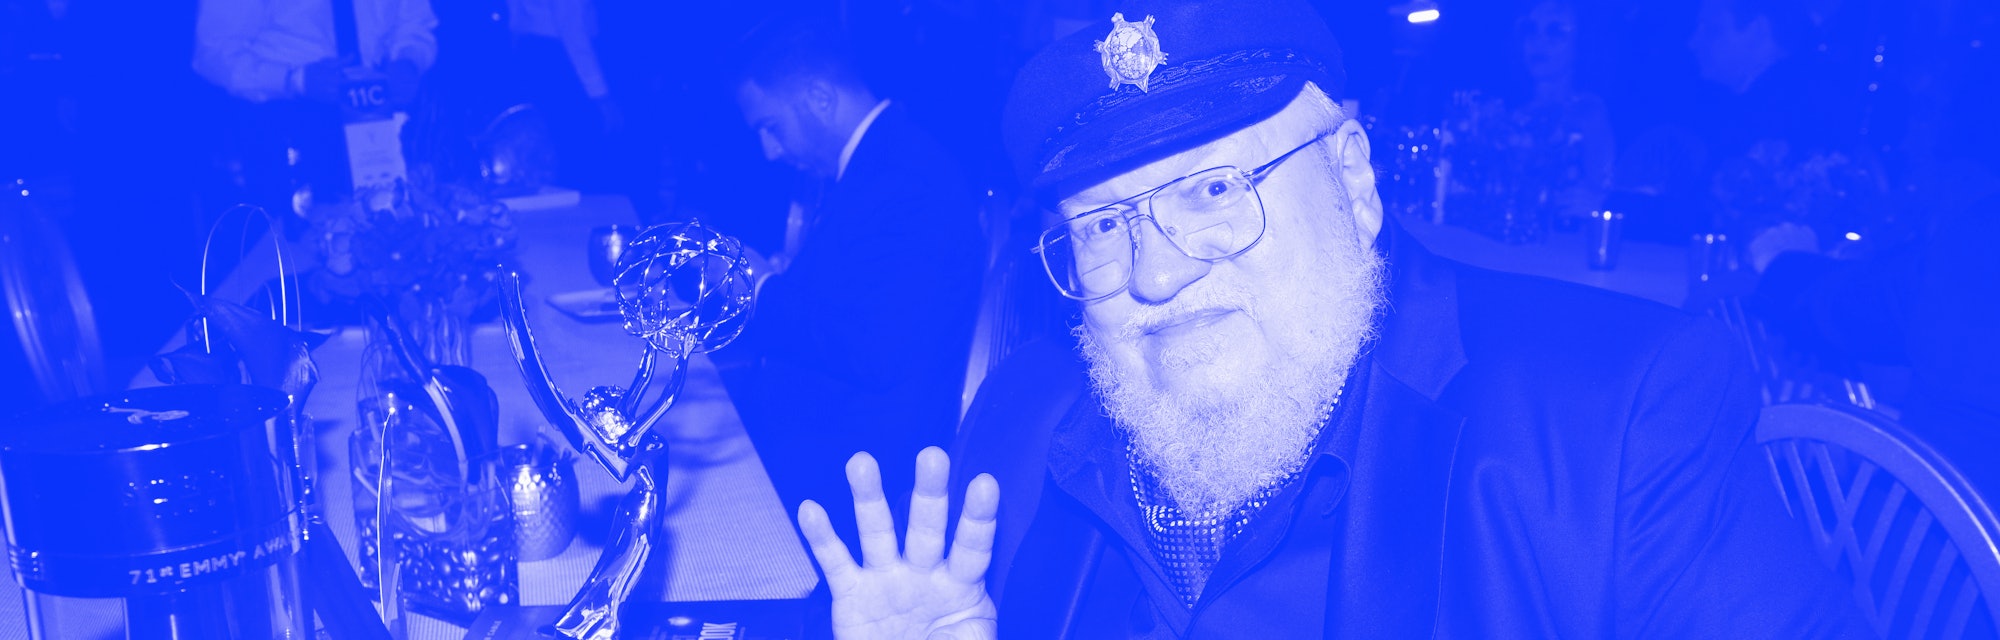 US novelist George R.R. Martin poses with the Emmy for Outstanding Drama Series "Game Of Thrones" du...